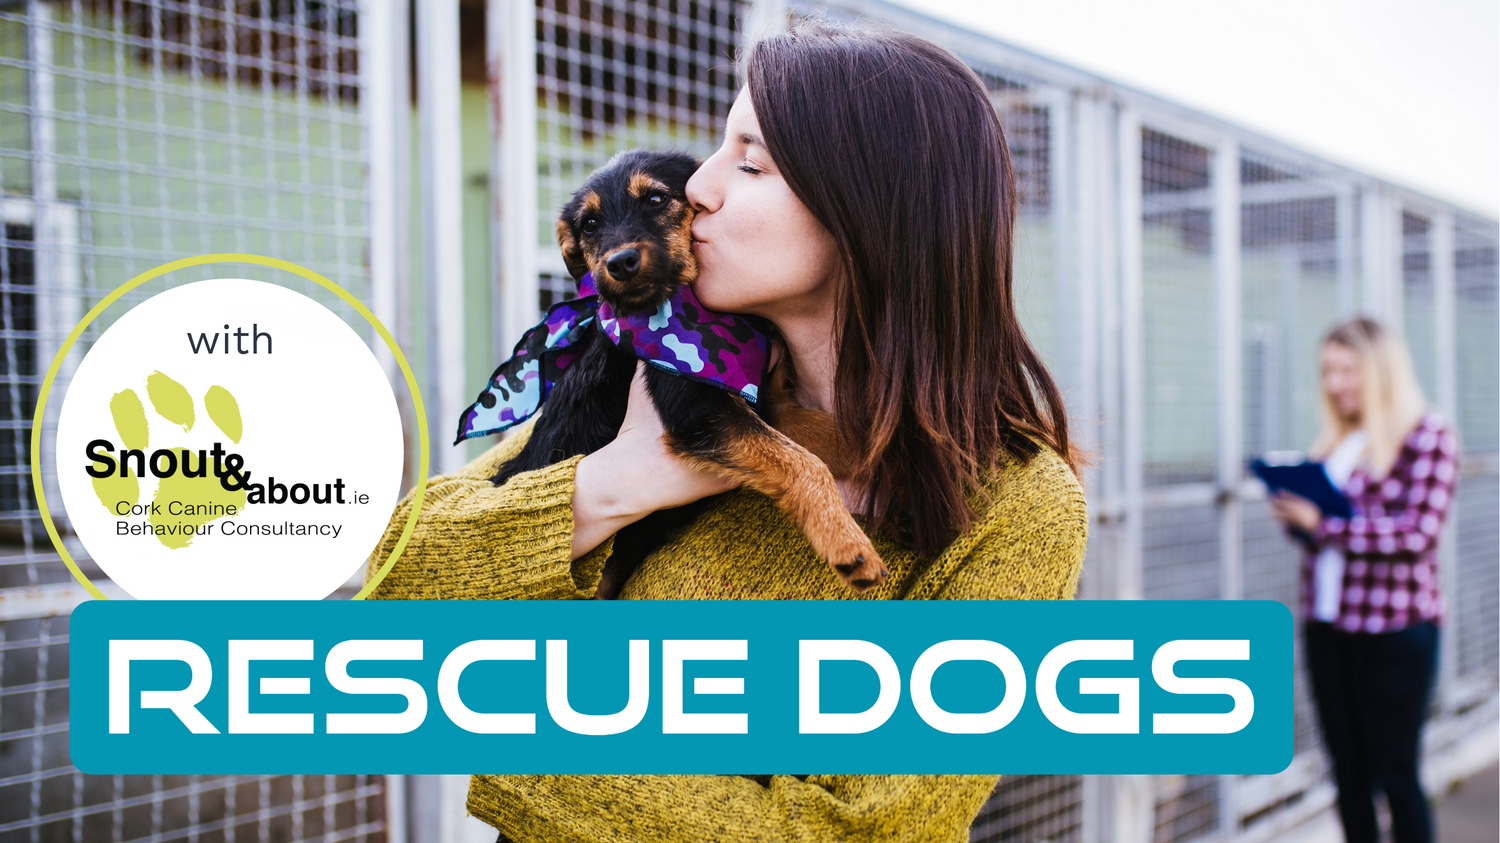 A woman holding and kissing a puppy in front of dog kennels and a box with text “Rescue Dogs”